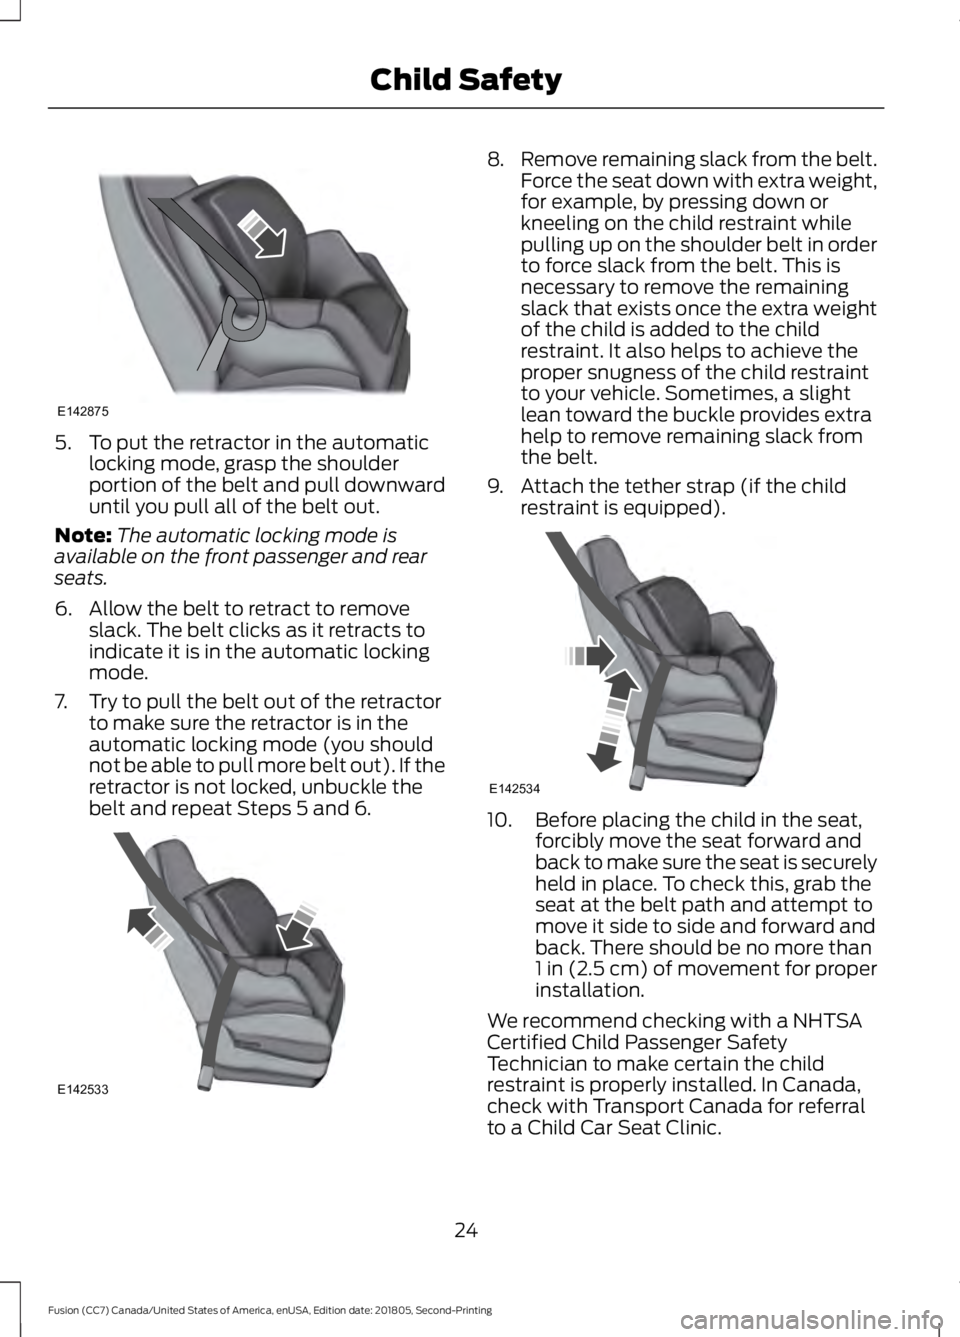 FORD FUSION 2019  Owners Manual 5. To put the retractor in the automatic
locking mode, grasp the shoulder
portion of the belt and pull downward
until you pull all of the belt out.
Note: The automatic locking mode is
available on the